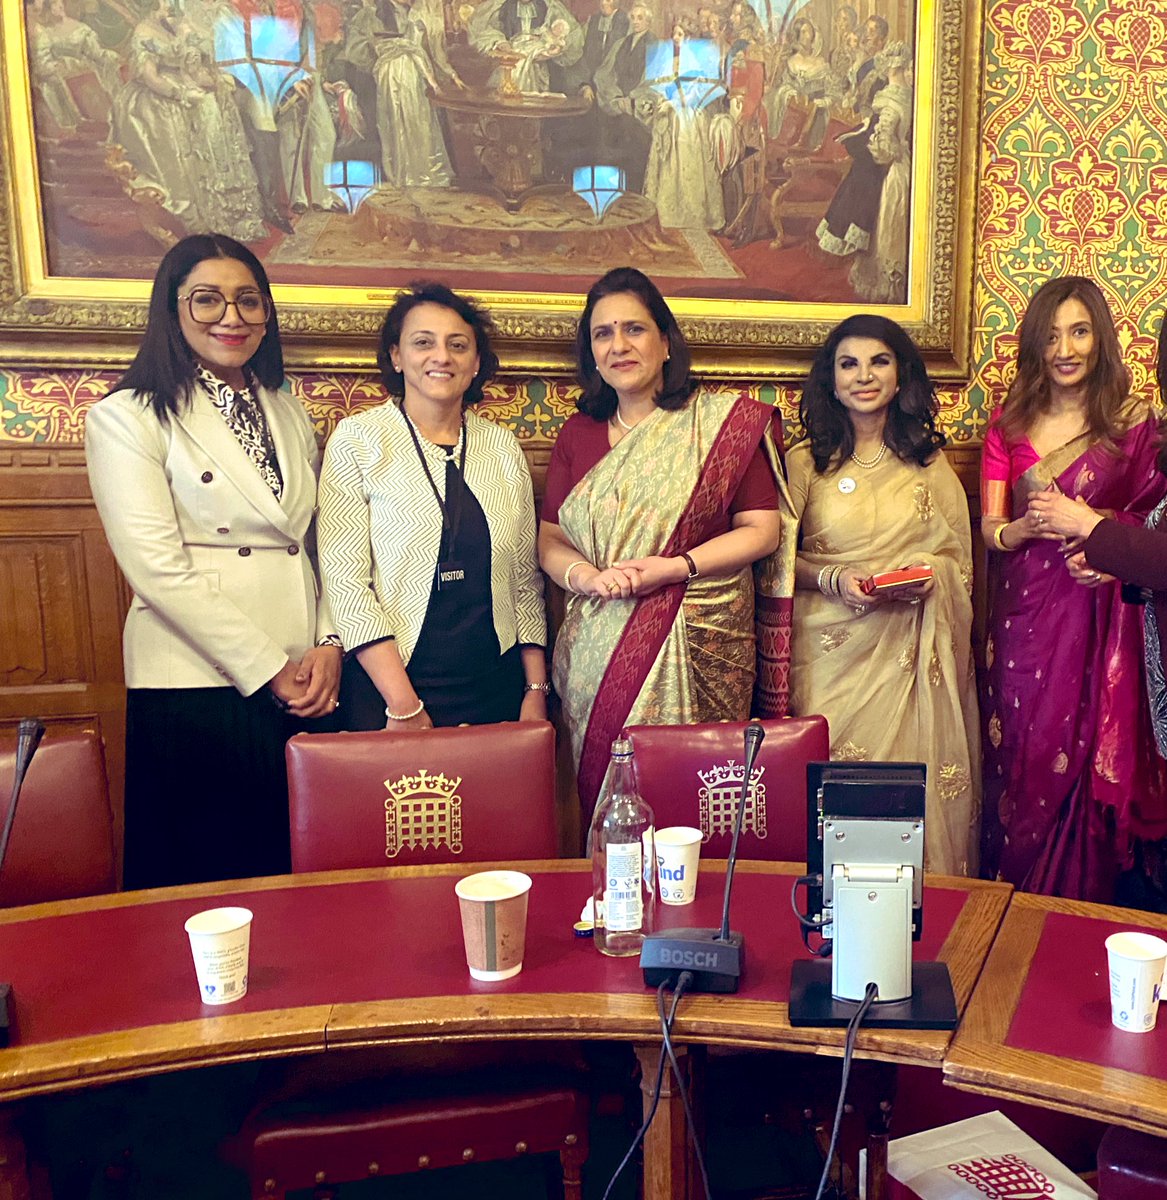 Delighted to be invited for a discussion on Global Trade UK & Commonwealth Roundtable at House of Lords hosted by @RamiRanger #lordBillimoria Secretary of State for International Trade Anne-Marie Trevelyan MP, HE Gaitri Kumar, HE Saroja Sirisena, HE Saida Muna Tasneem